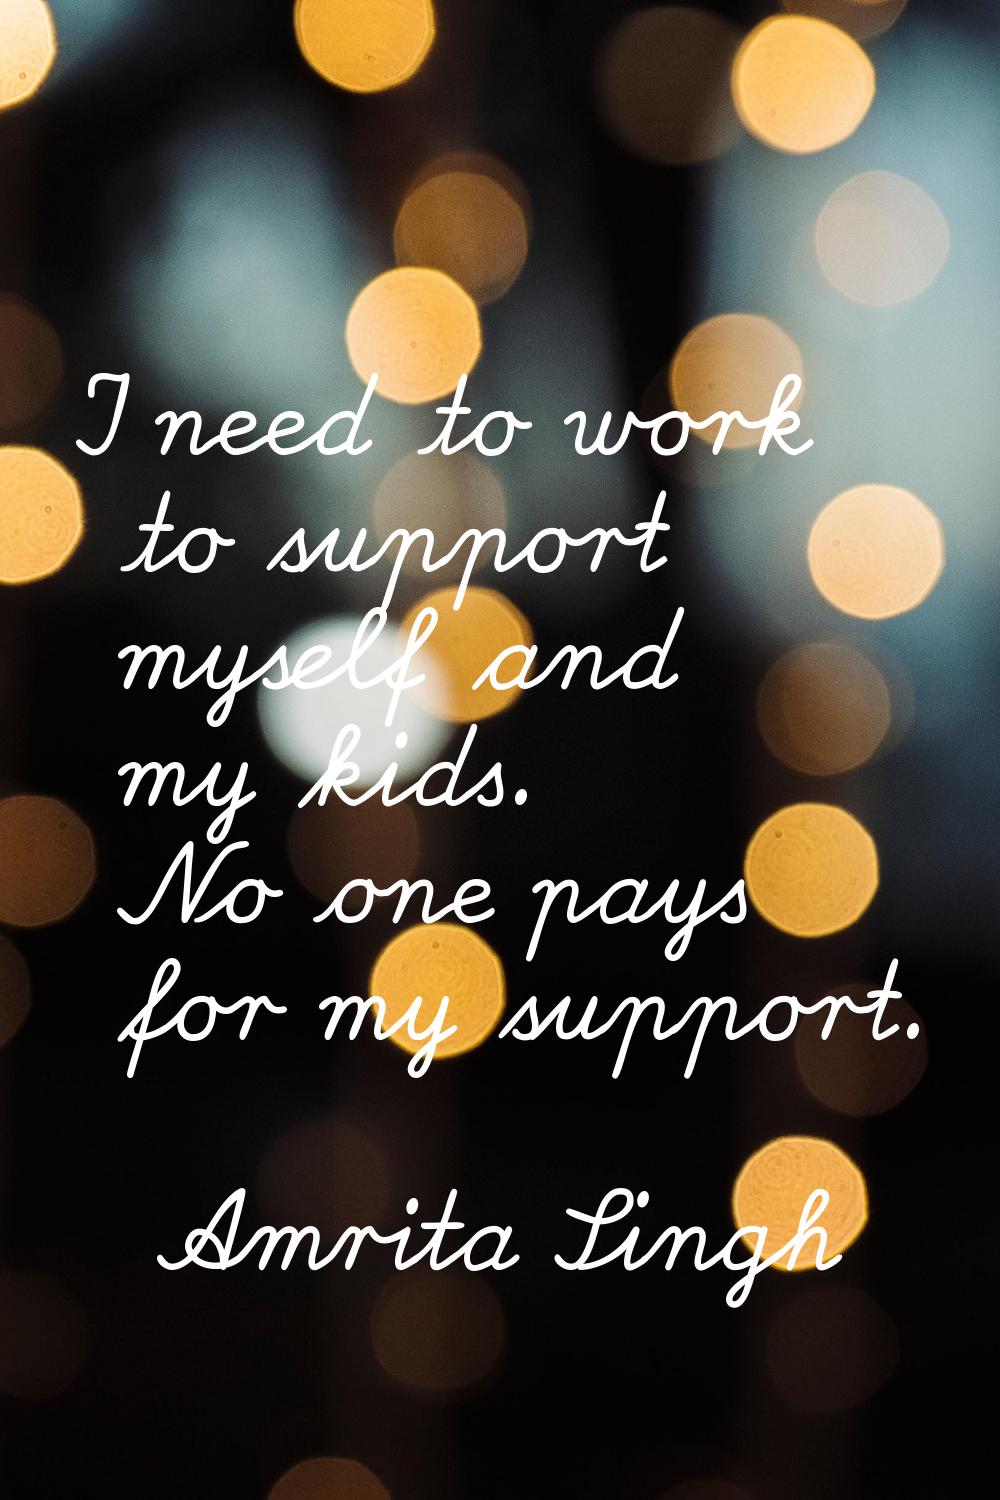 I need to work to support myself and my kids. No one pays for my support.